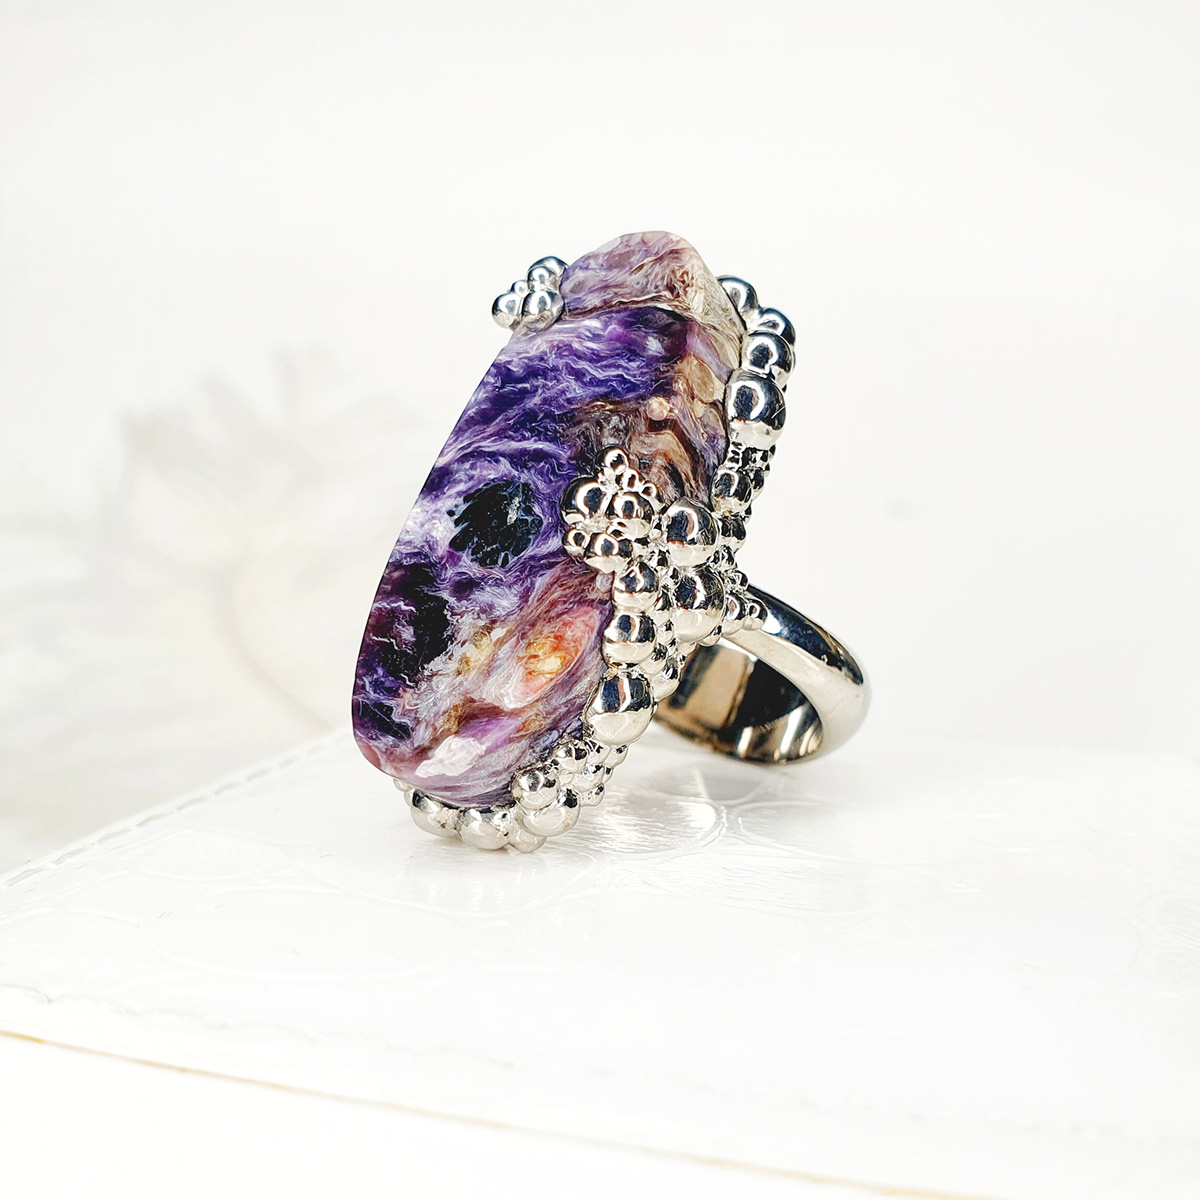 One-of-a-kind oval charoite statement ring